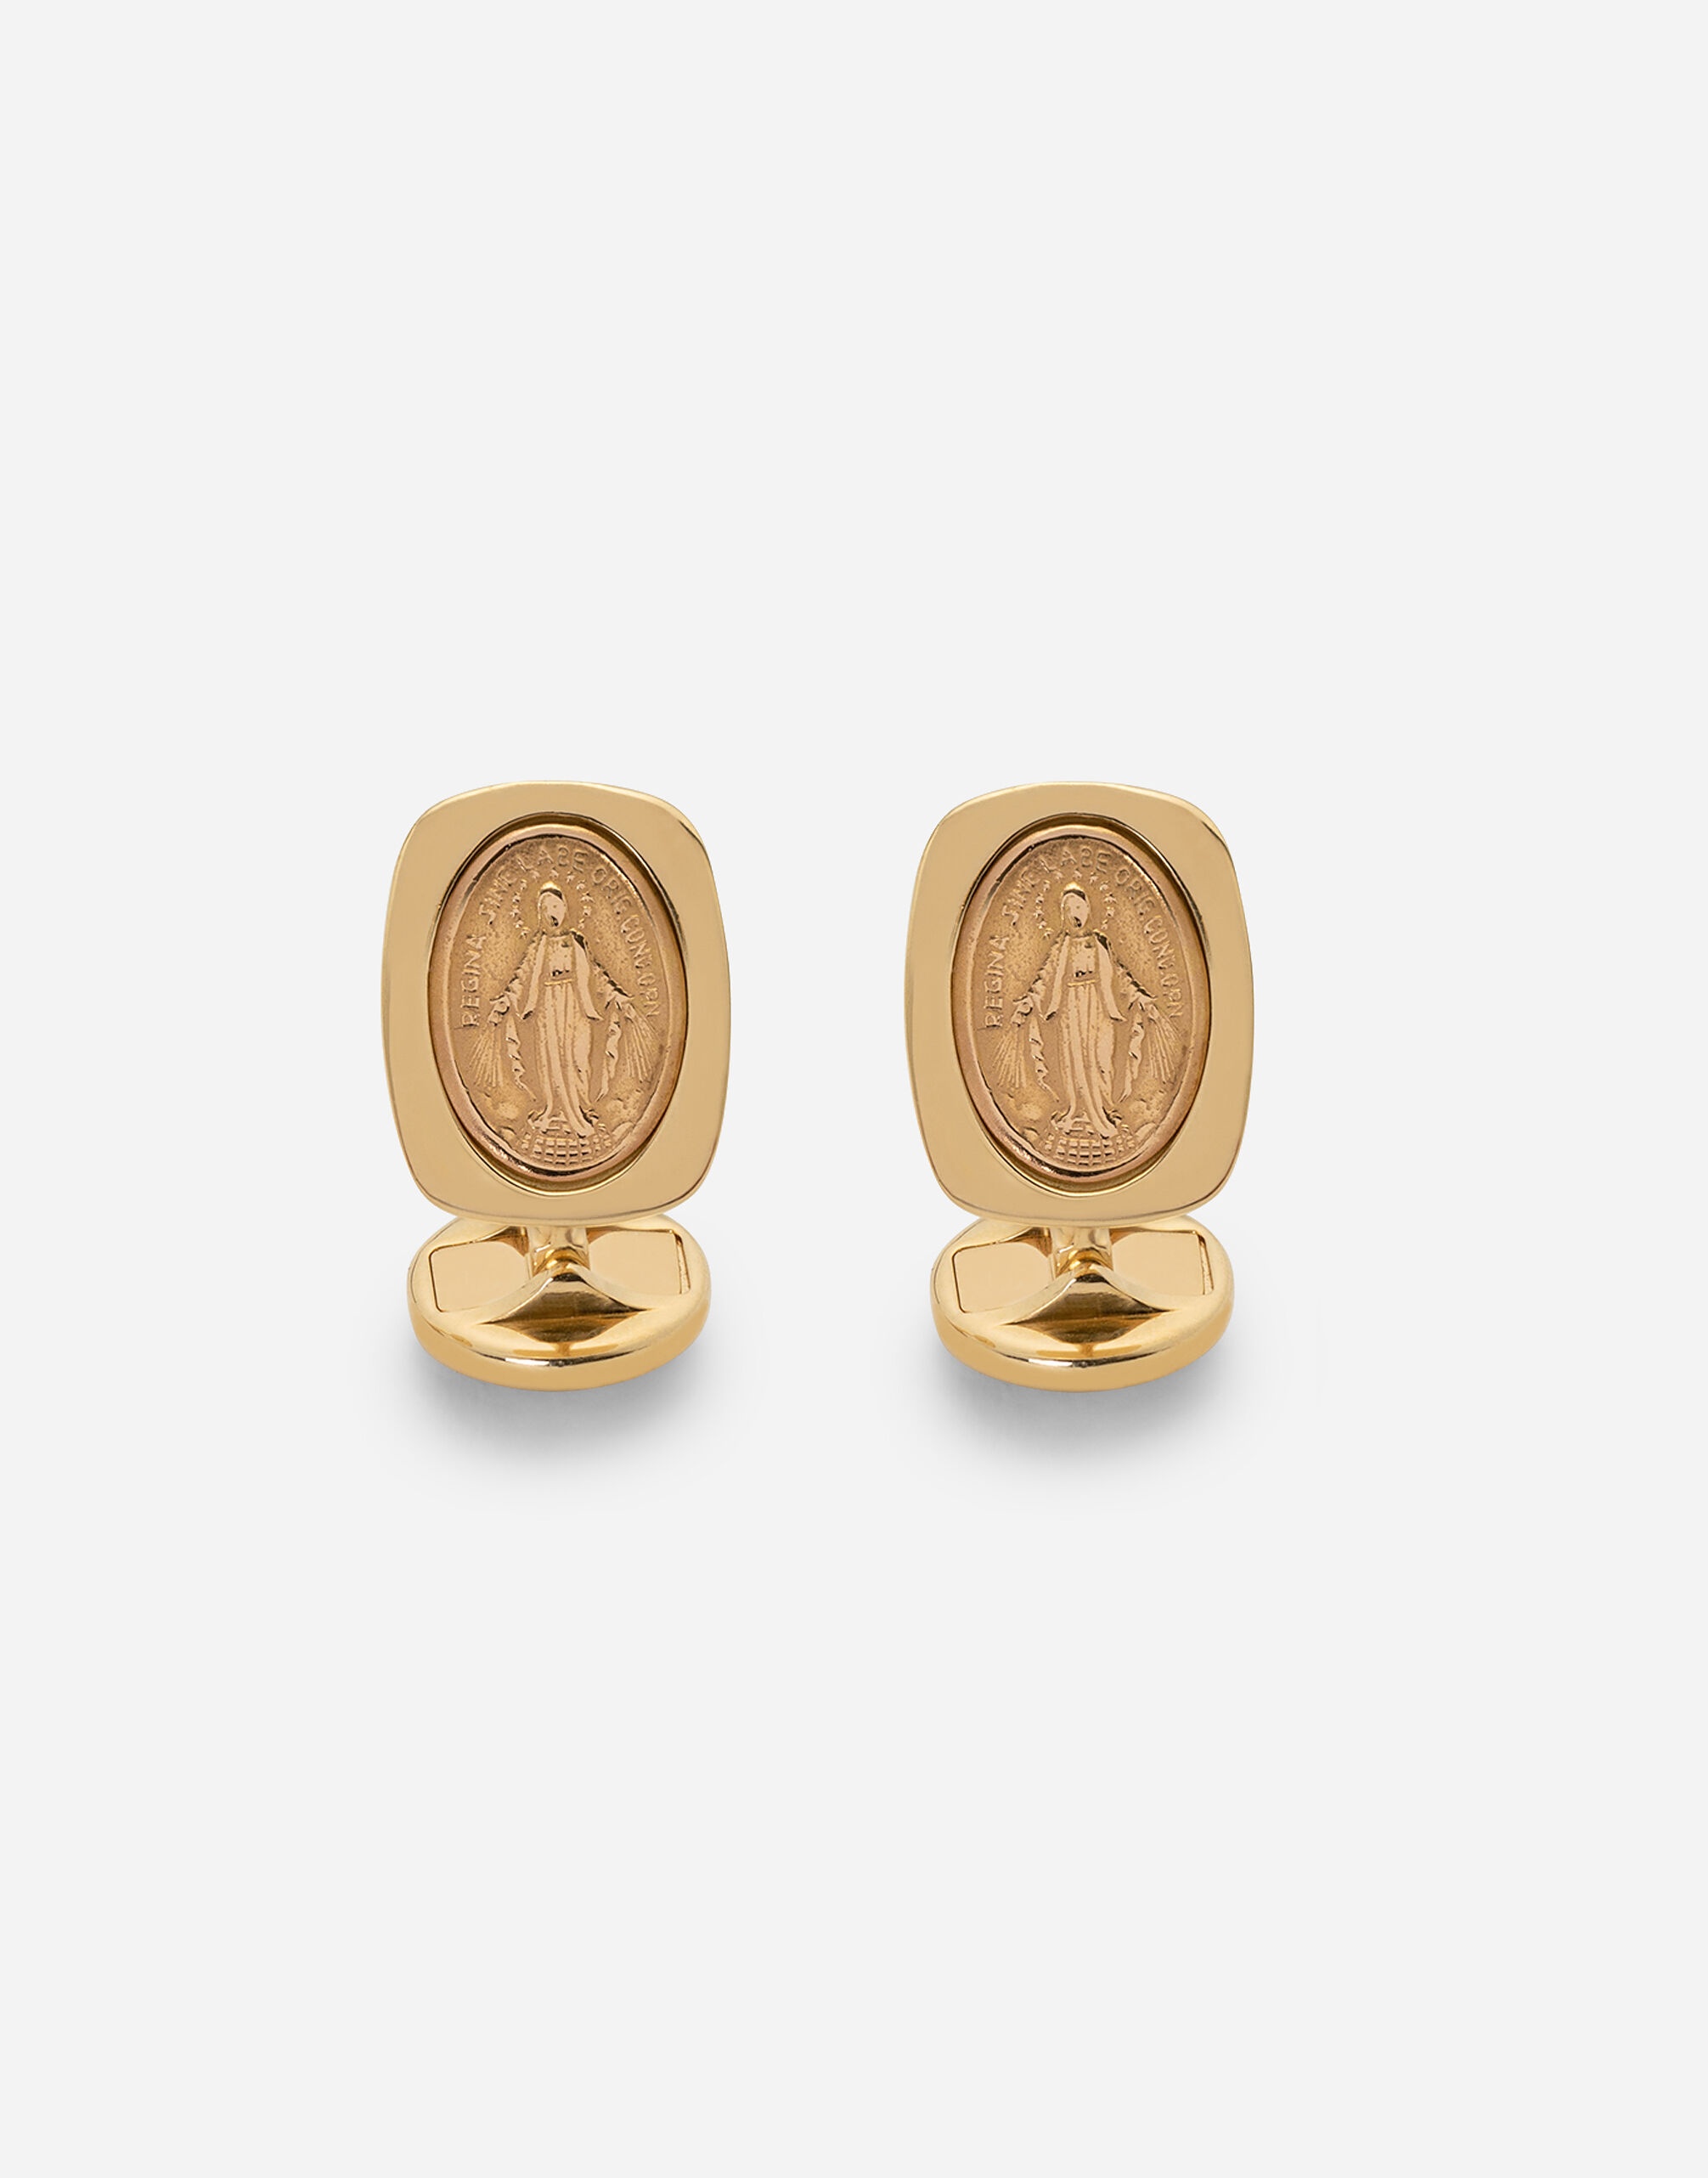 Devotion yellow gold cufflinks with a red gold Virgin Mary medallion - 1